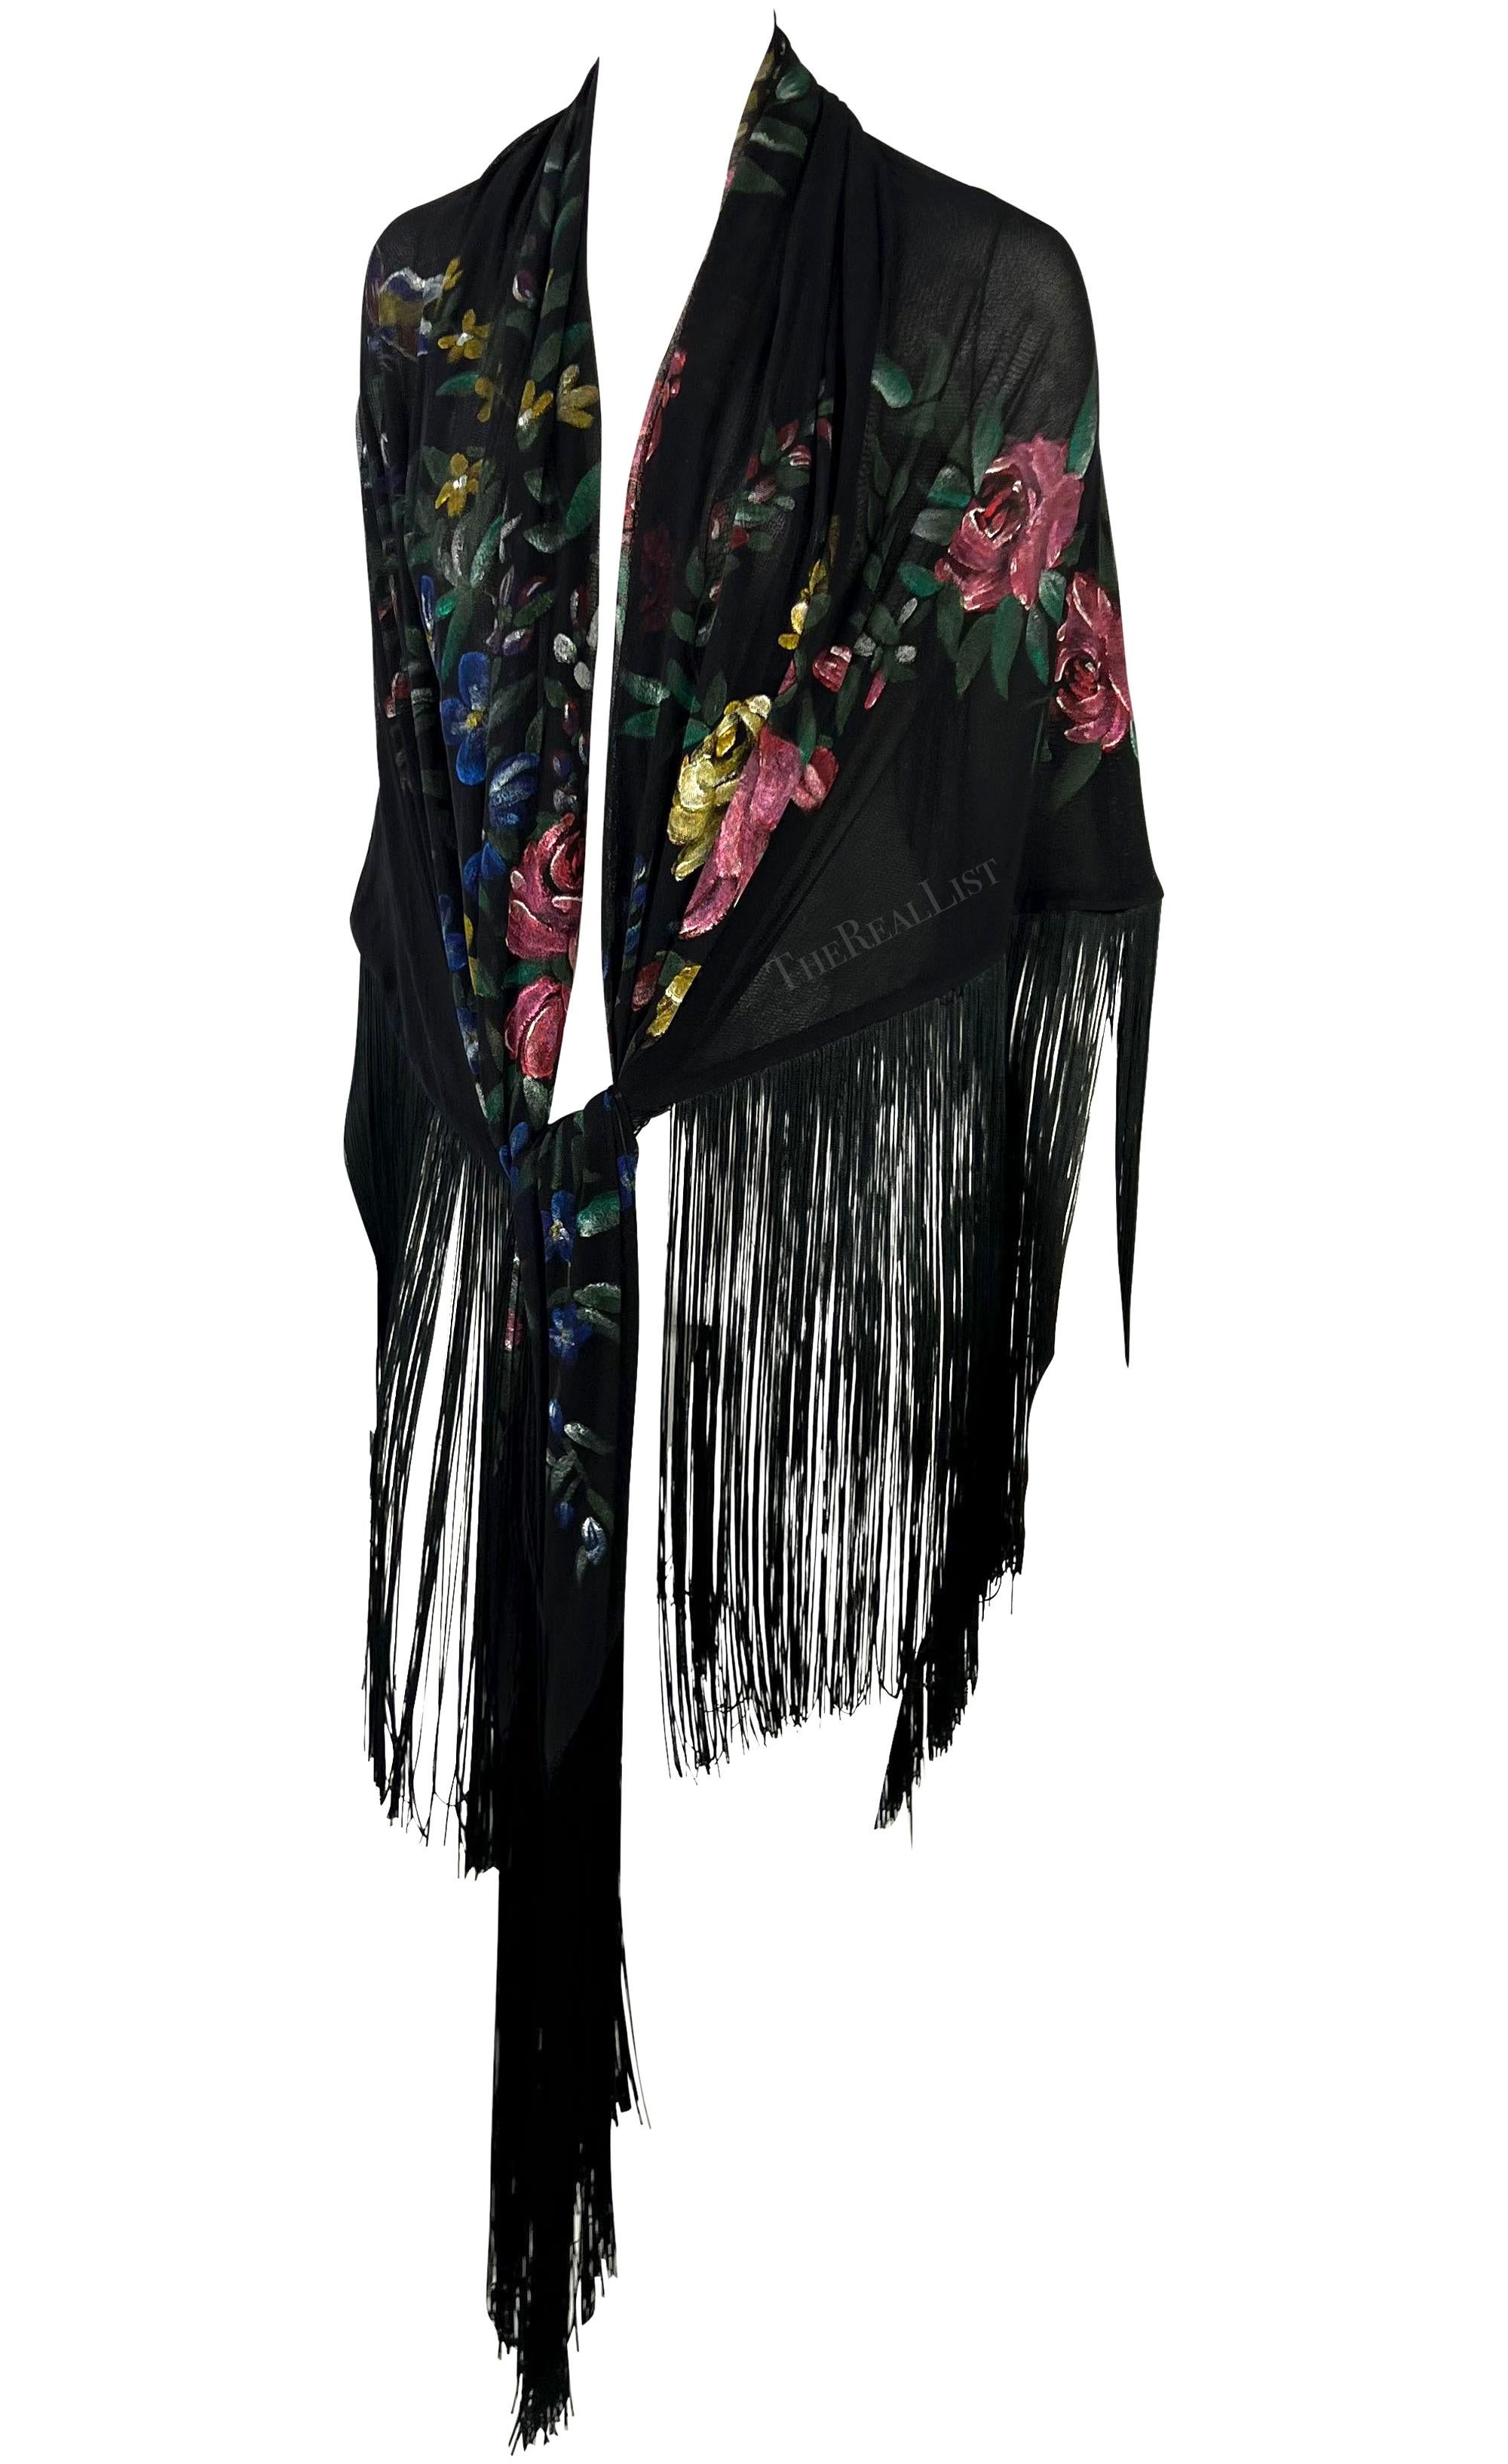 F/W 1998 Dolce & Gabbana Runway Floral Hand-Painted Sheer Mesh Fringe Shawl For Sale 3